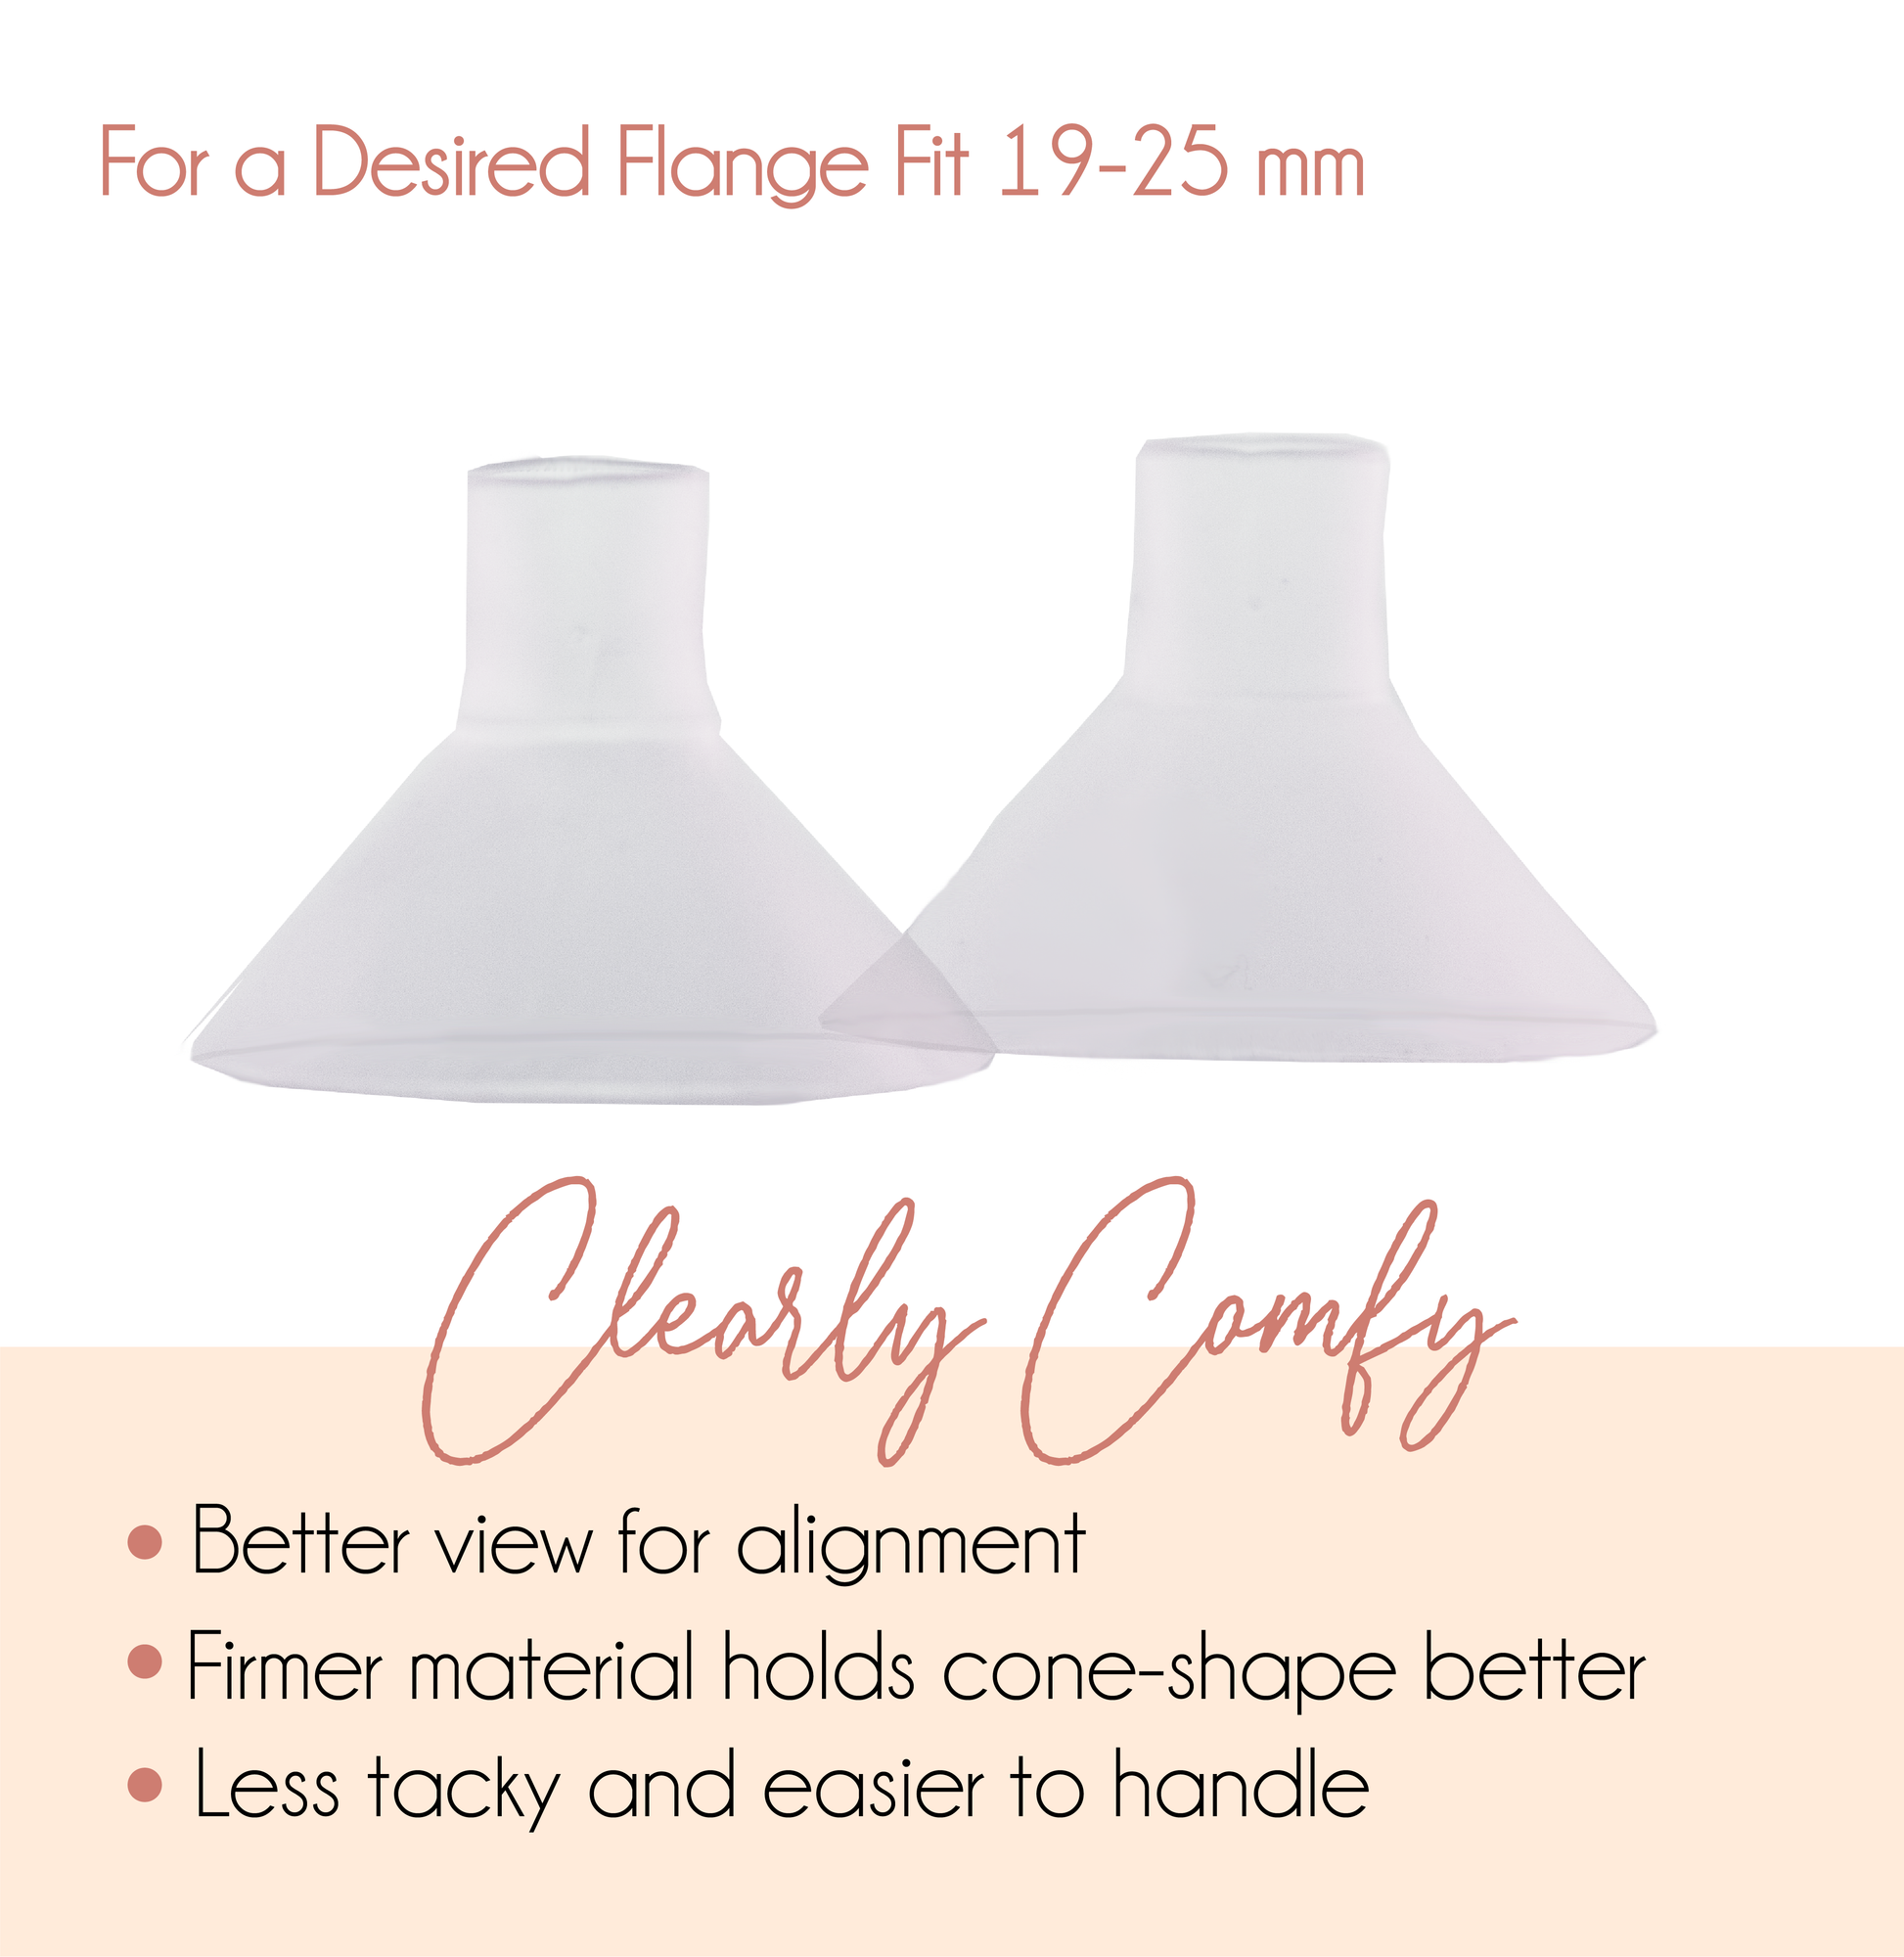 Take the pain out of pumping and get a better flange fit with the Clearly Comfy Cushions from BeauGen. Try a single pair, and make pumping more sustainable today.